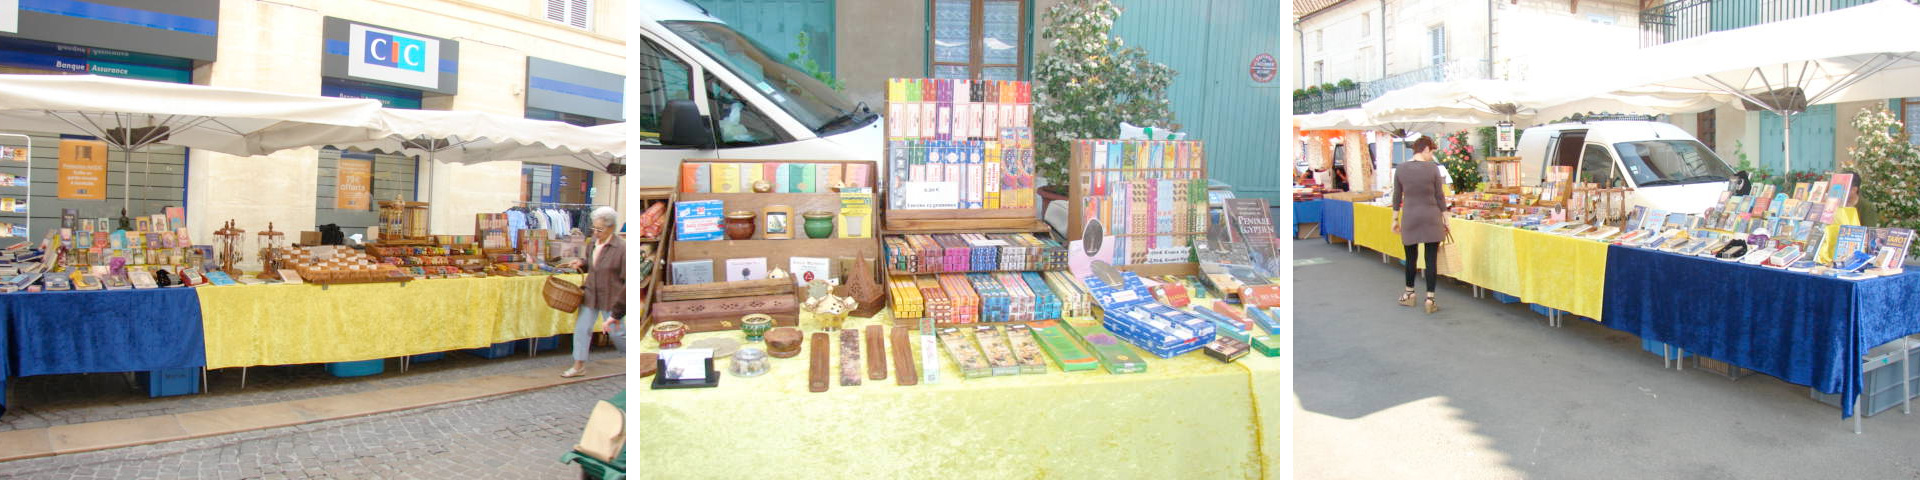 stand marché